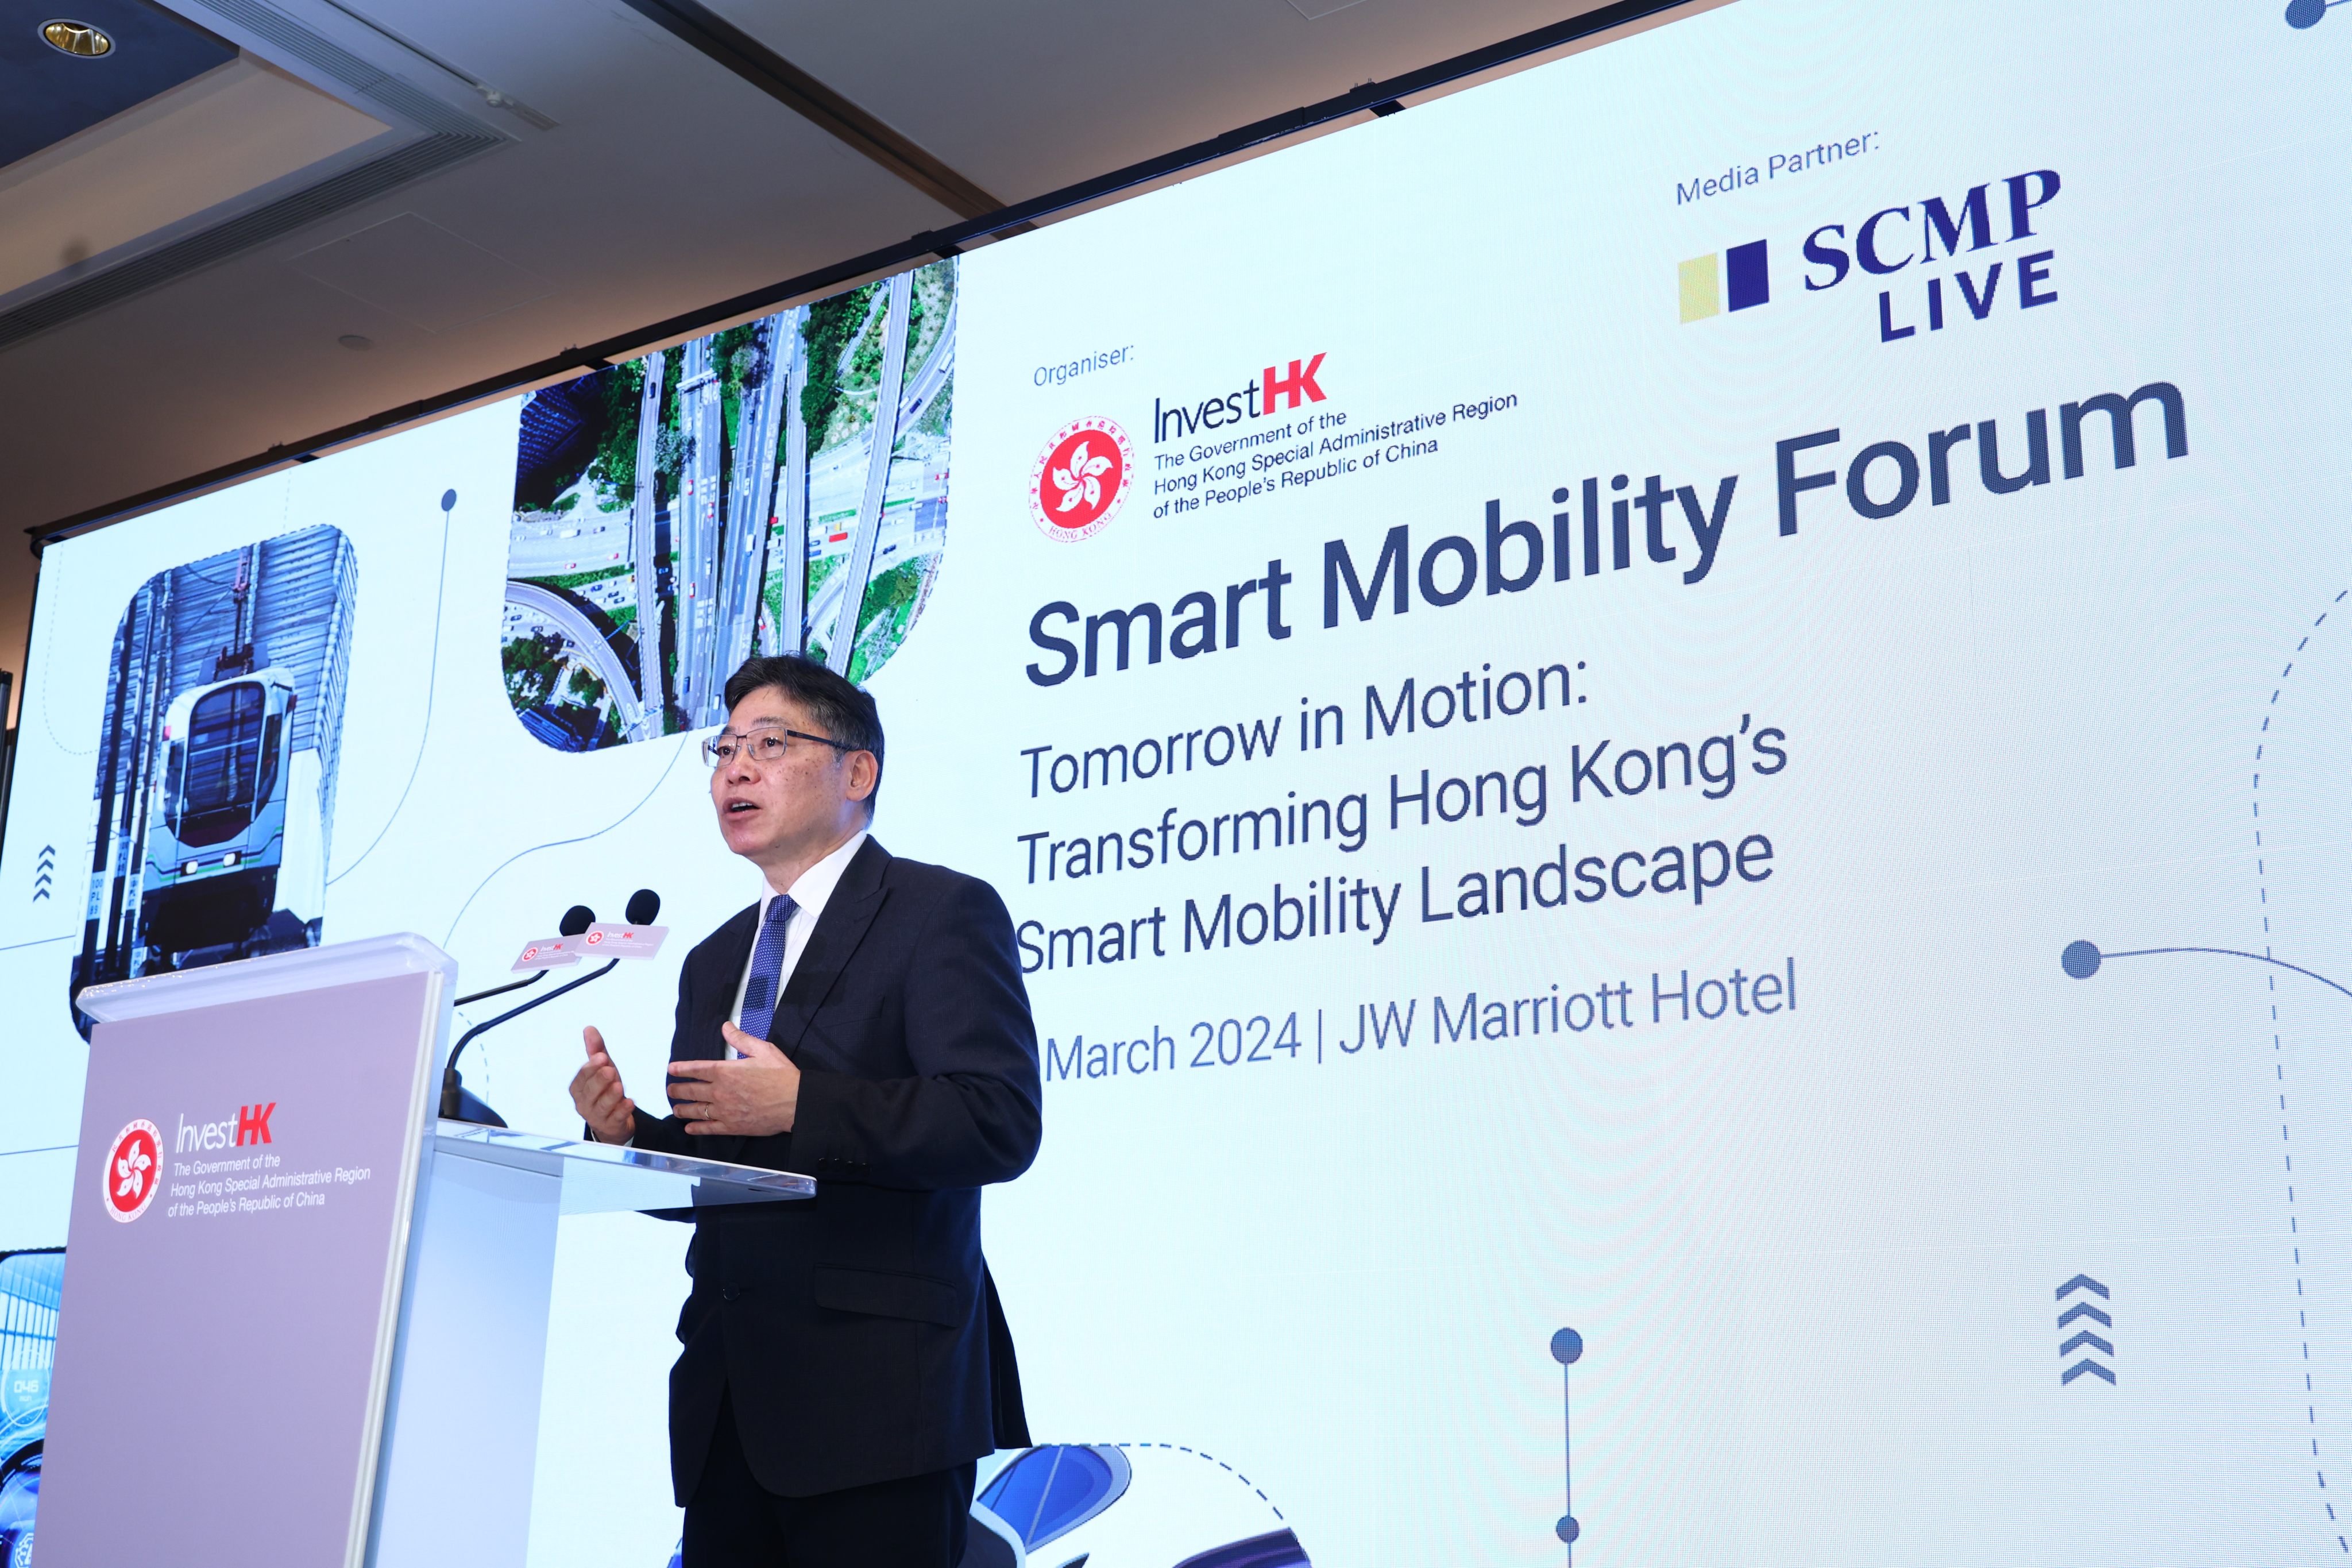 Hong Kong’s Secretary for Transport and Logistics, Lam Sai-hung, delivers his keynote address at the Smart Mobility Forum on March 1, 2024. Photo: SCMP Live